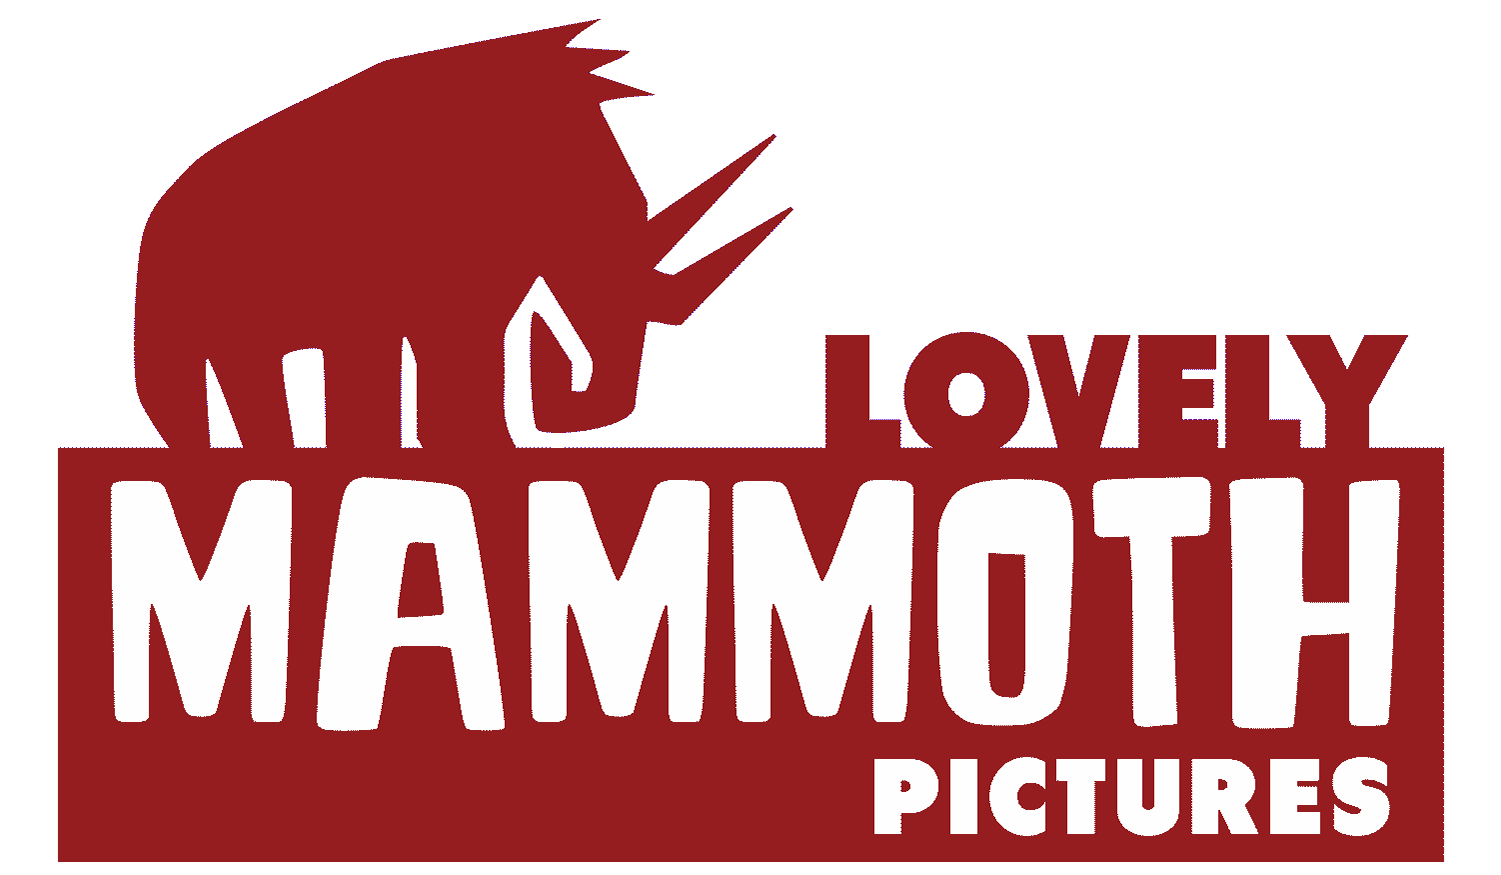 Lovely Mammoth Pictures